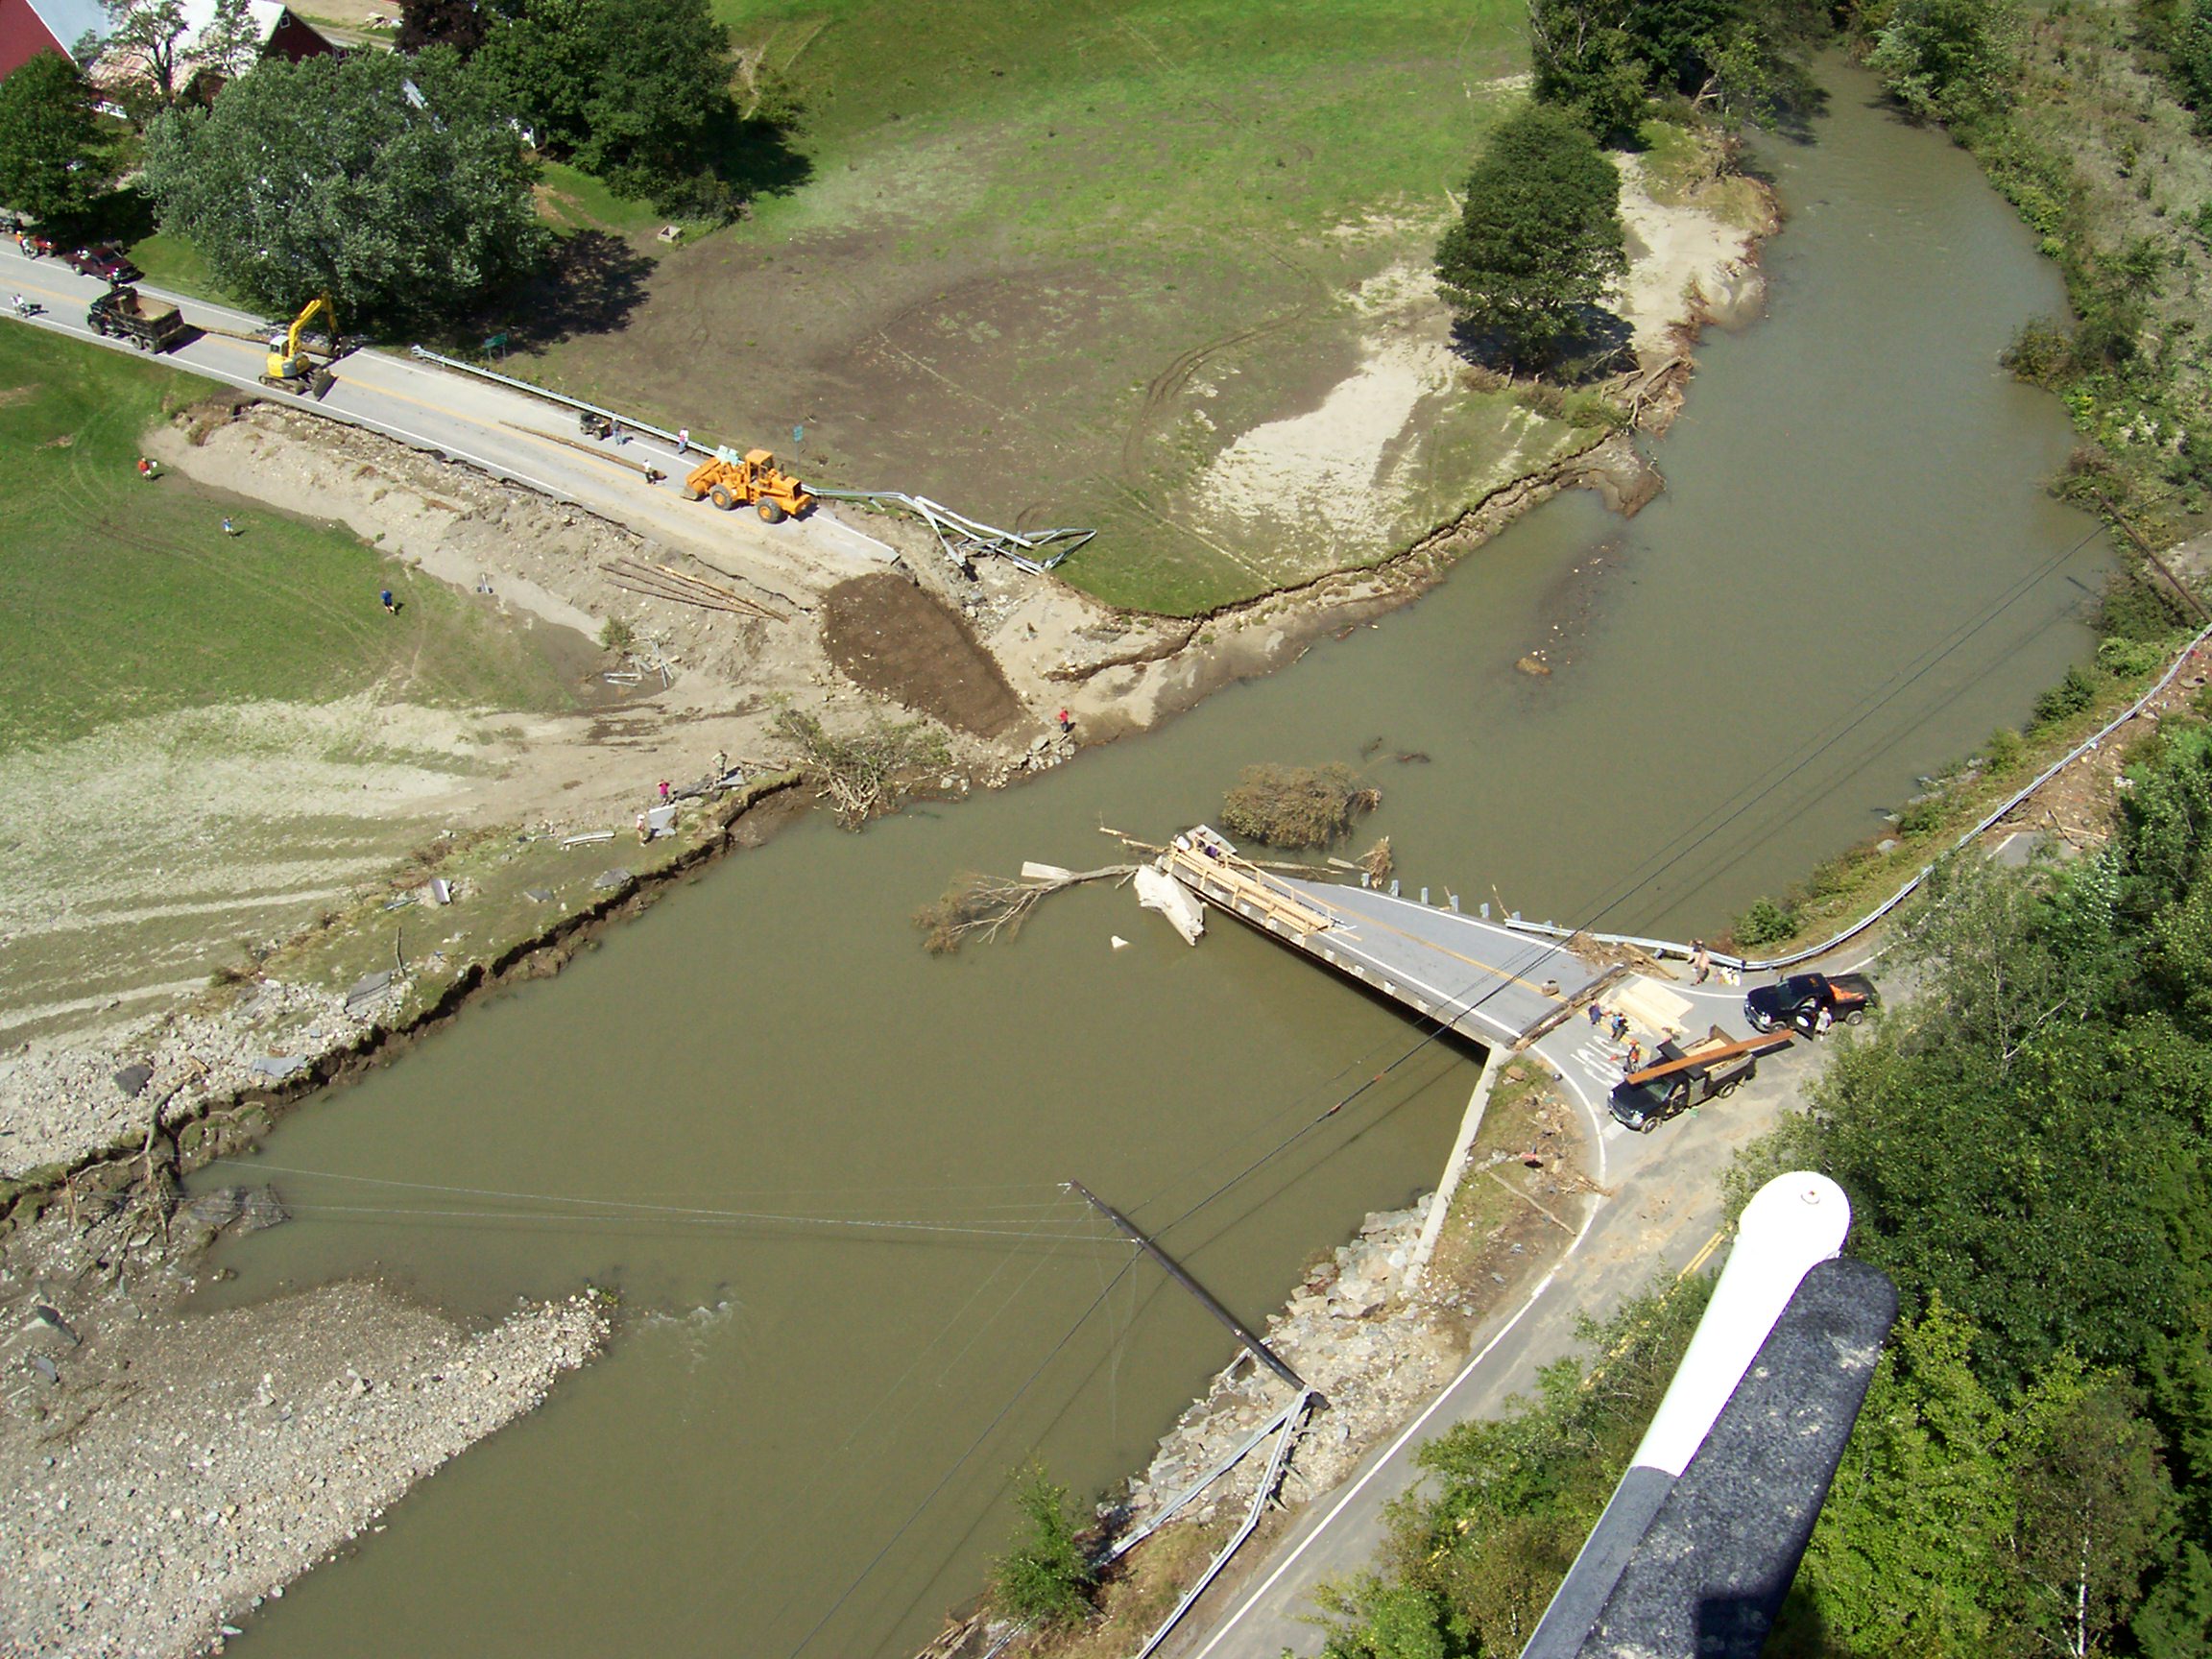 Photograph of Bridge 19 in Rochester, VT after Tropical Storm Irene. (VT Department of Transportation, 2011)